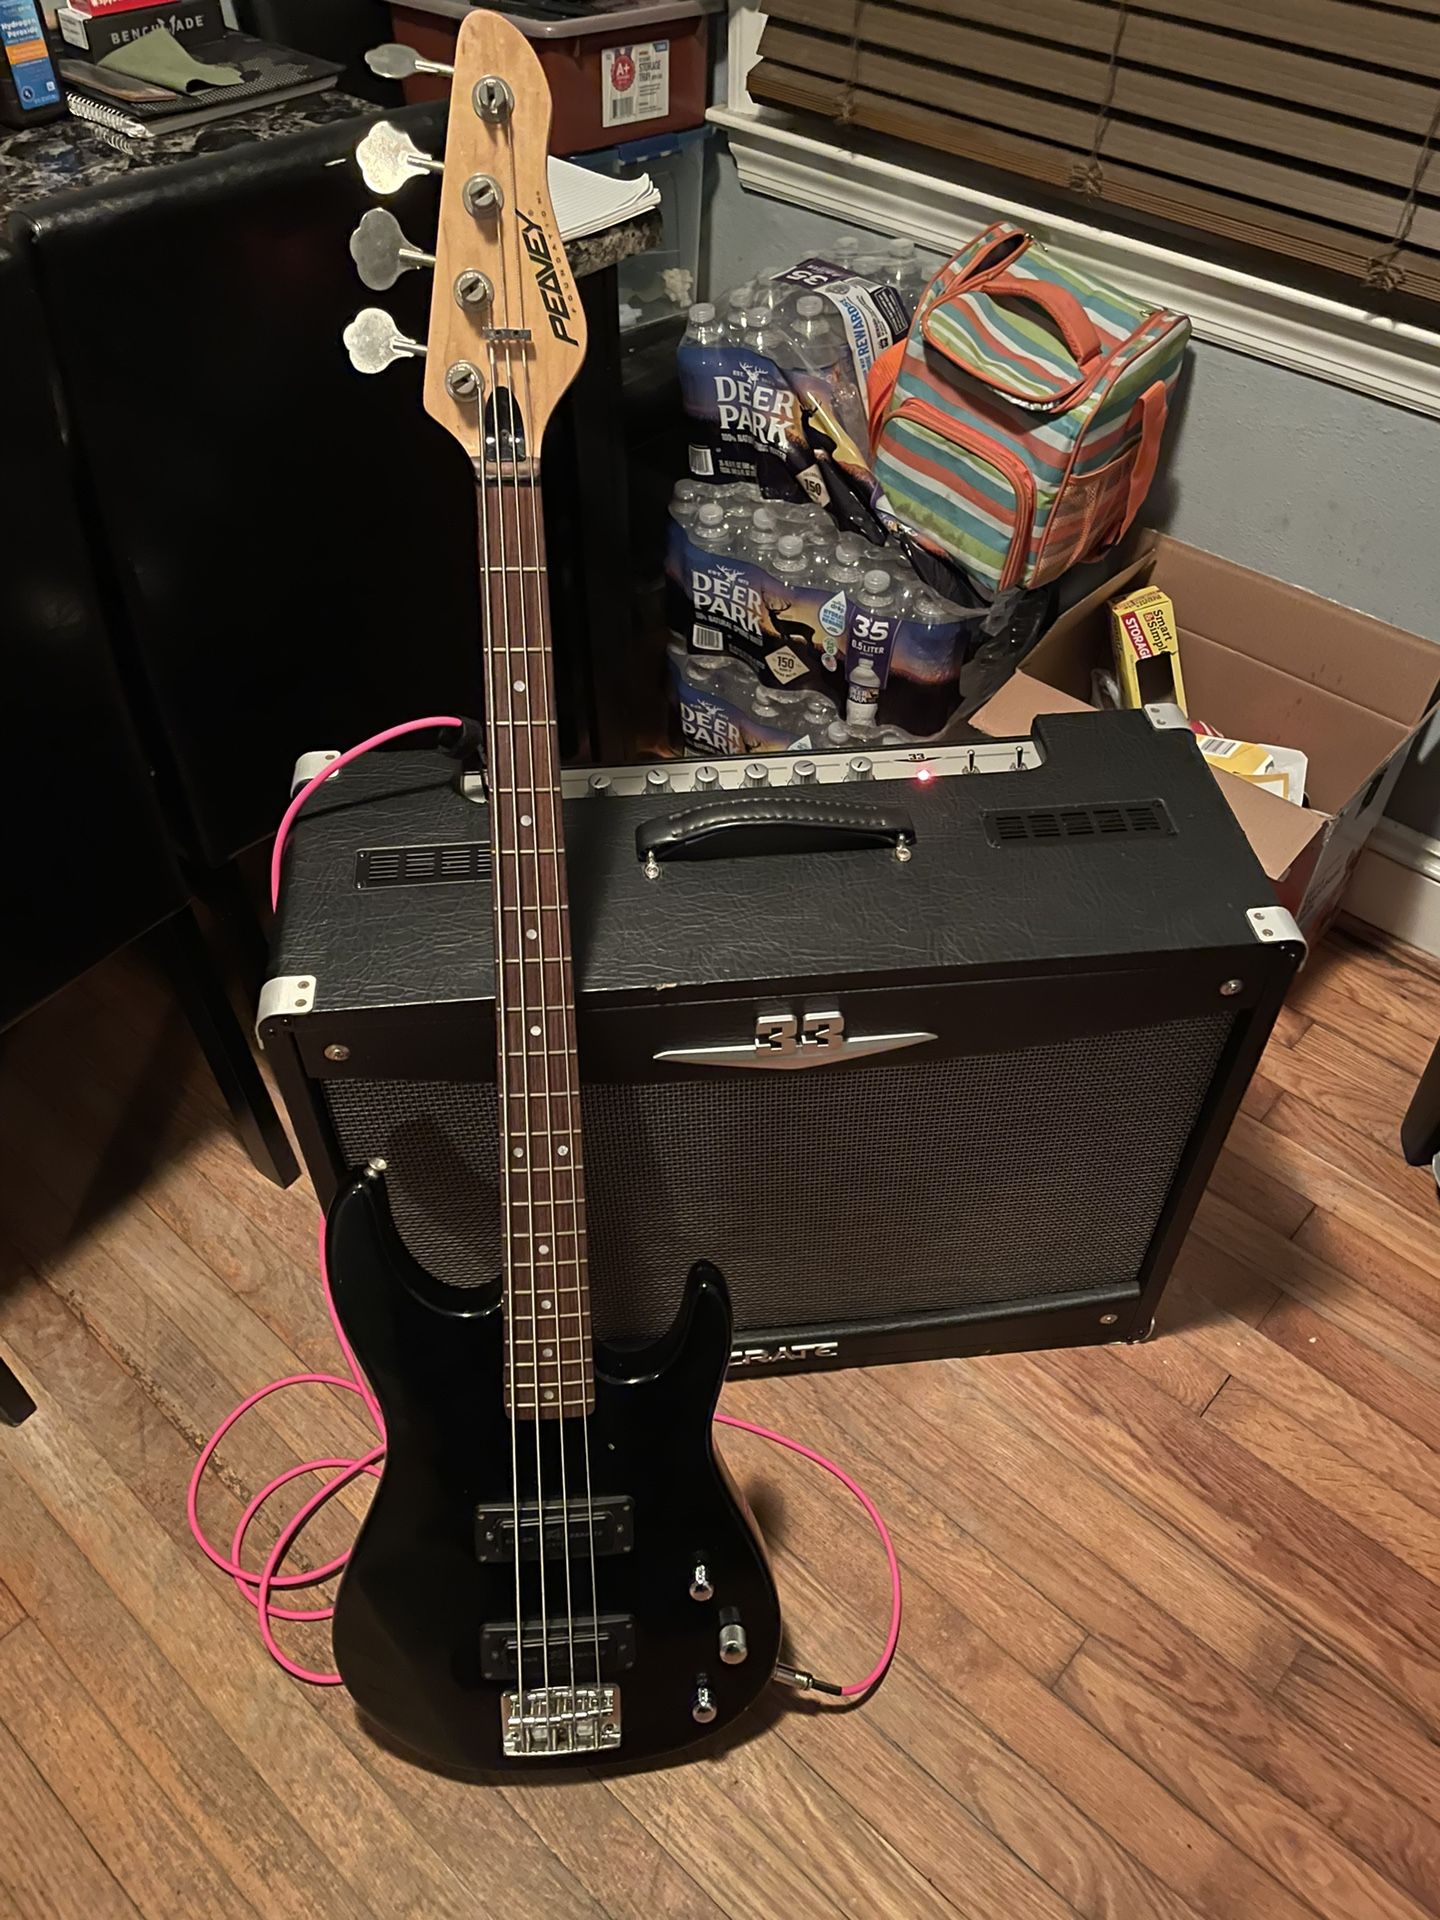 1992 Vintage Peavey Bass And Crate 33 Tube Amp